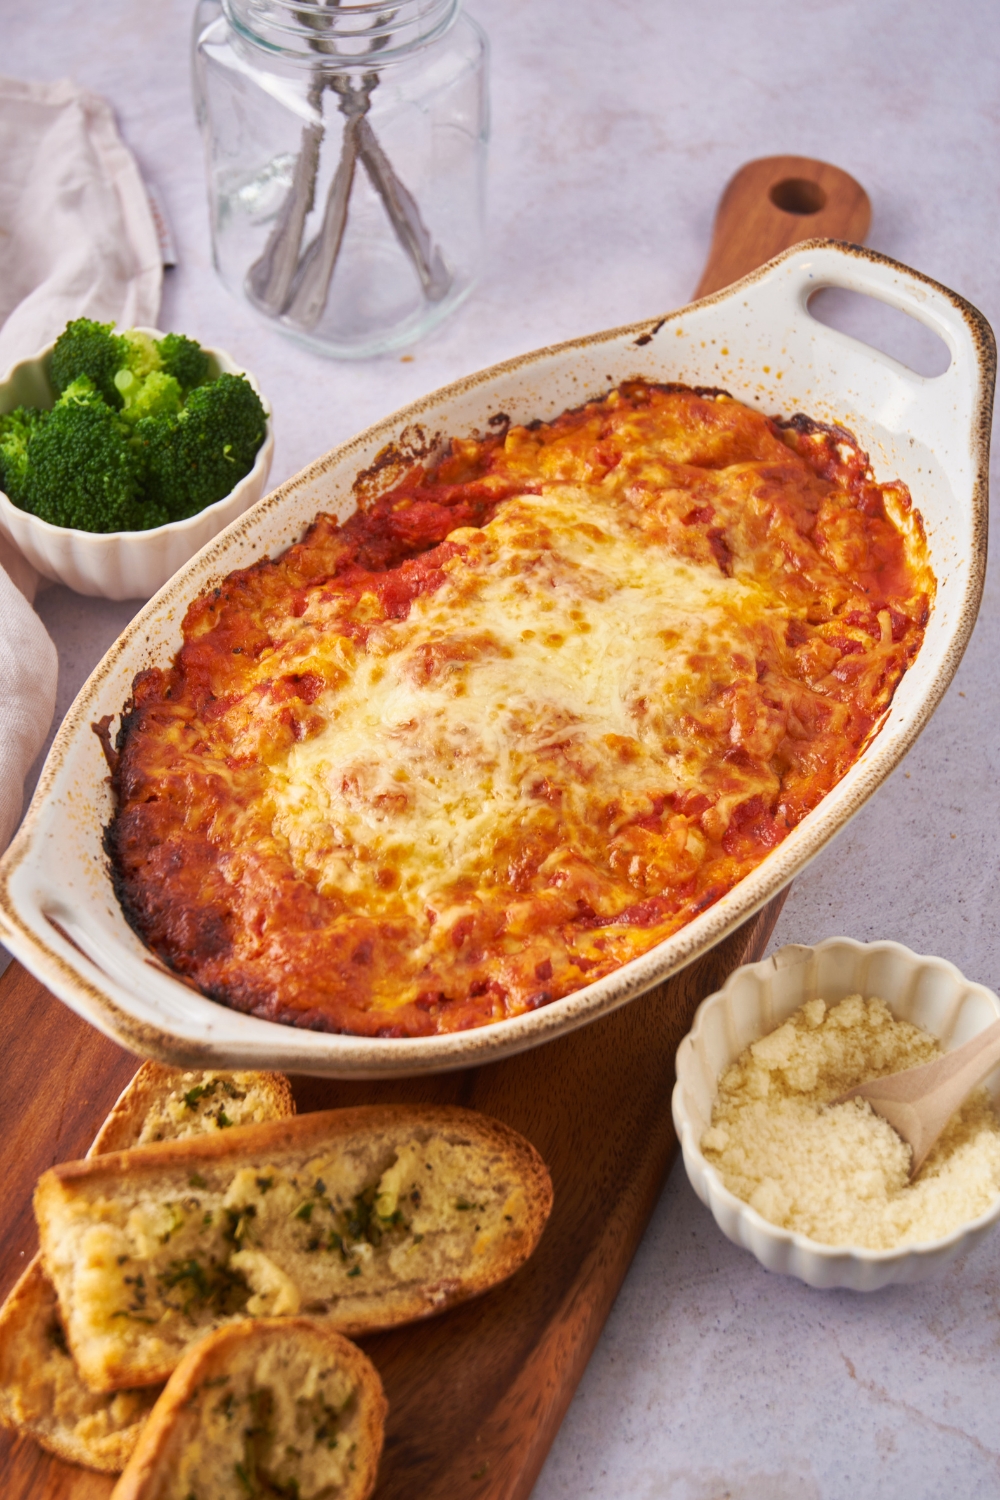 Baking dish filled with baked ravioli covered in melted cheese on a wooden board with garlic bread and a bowl of parmesan cheese.